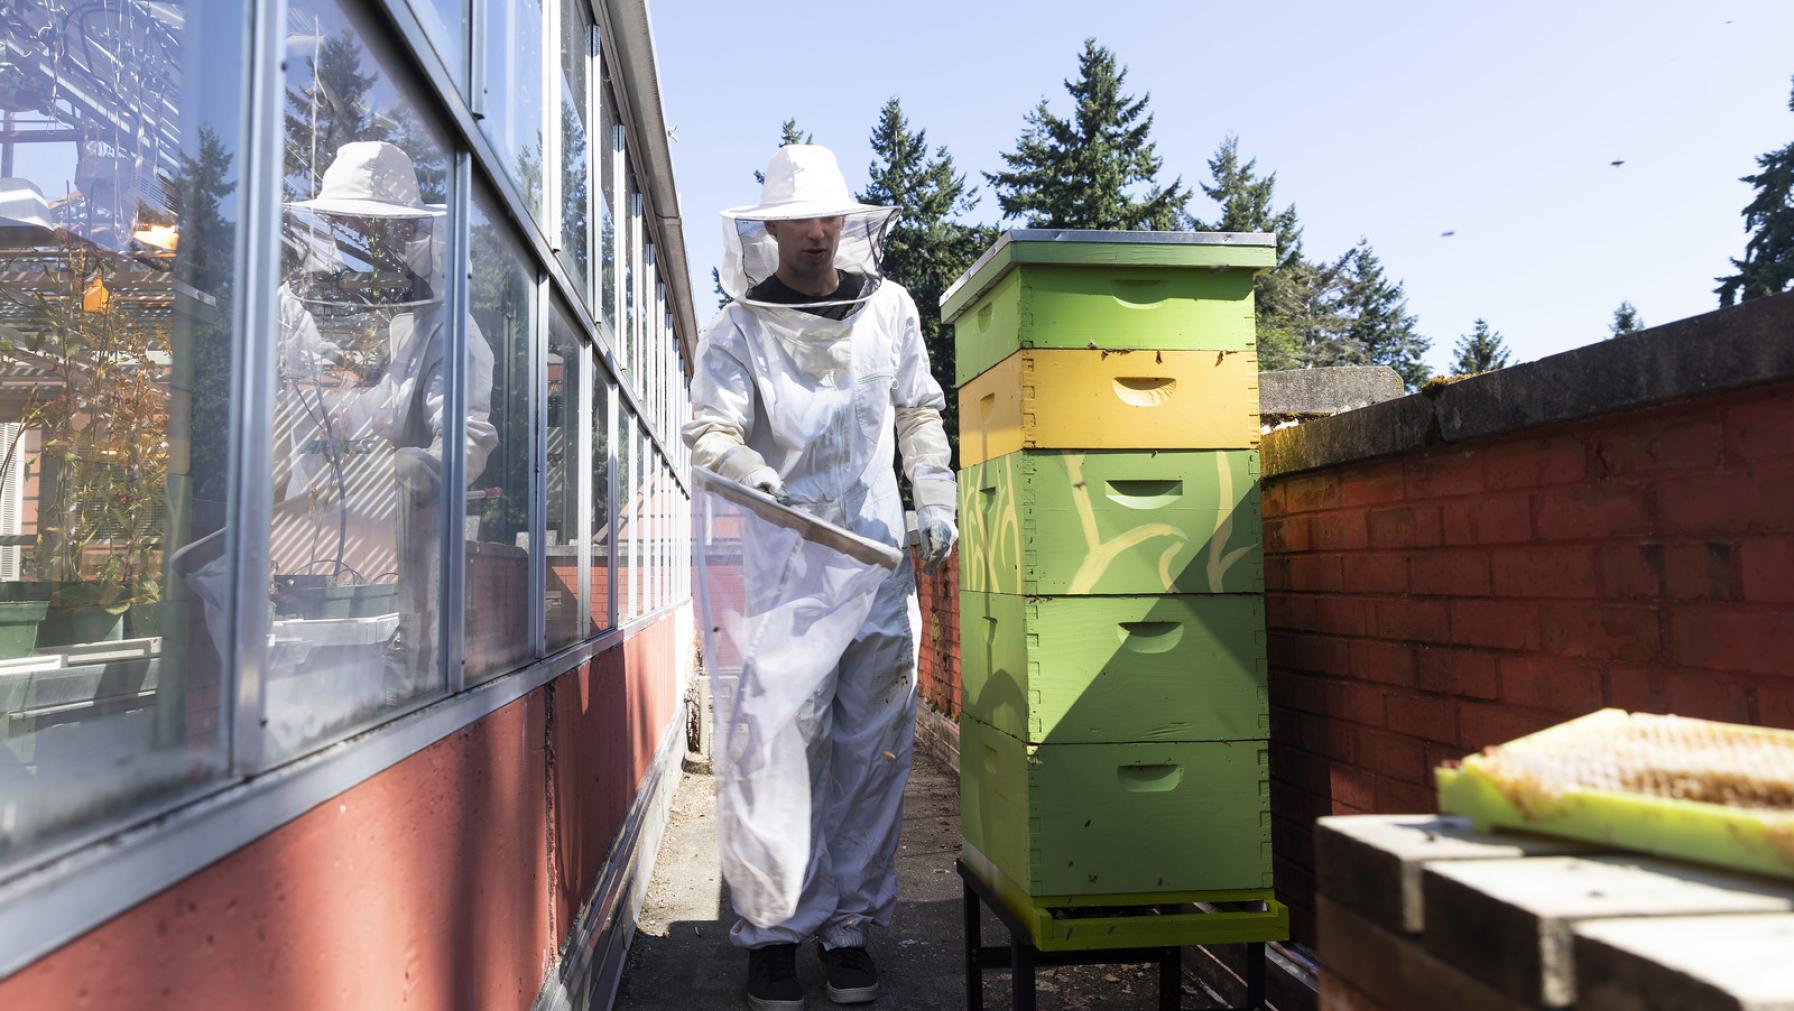 Adam Schmidt ’23, in a white beekeeper suit, stands next to stacked green and yellow boxes containing thousands of bees